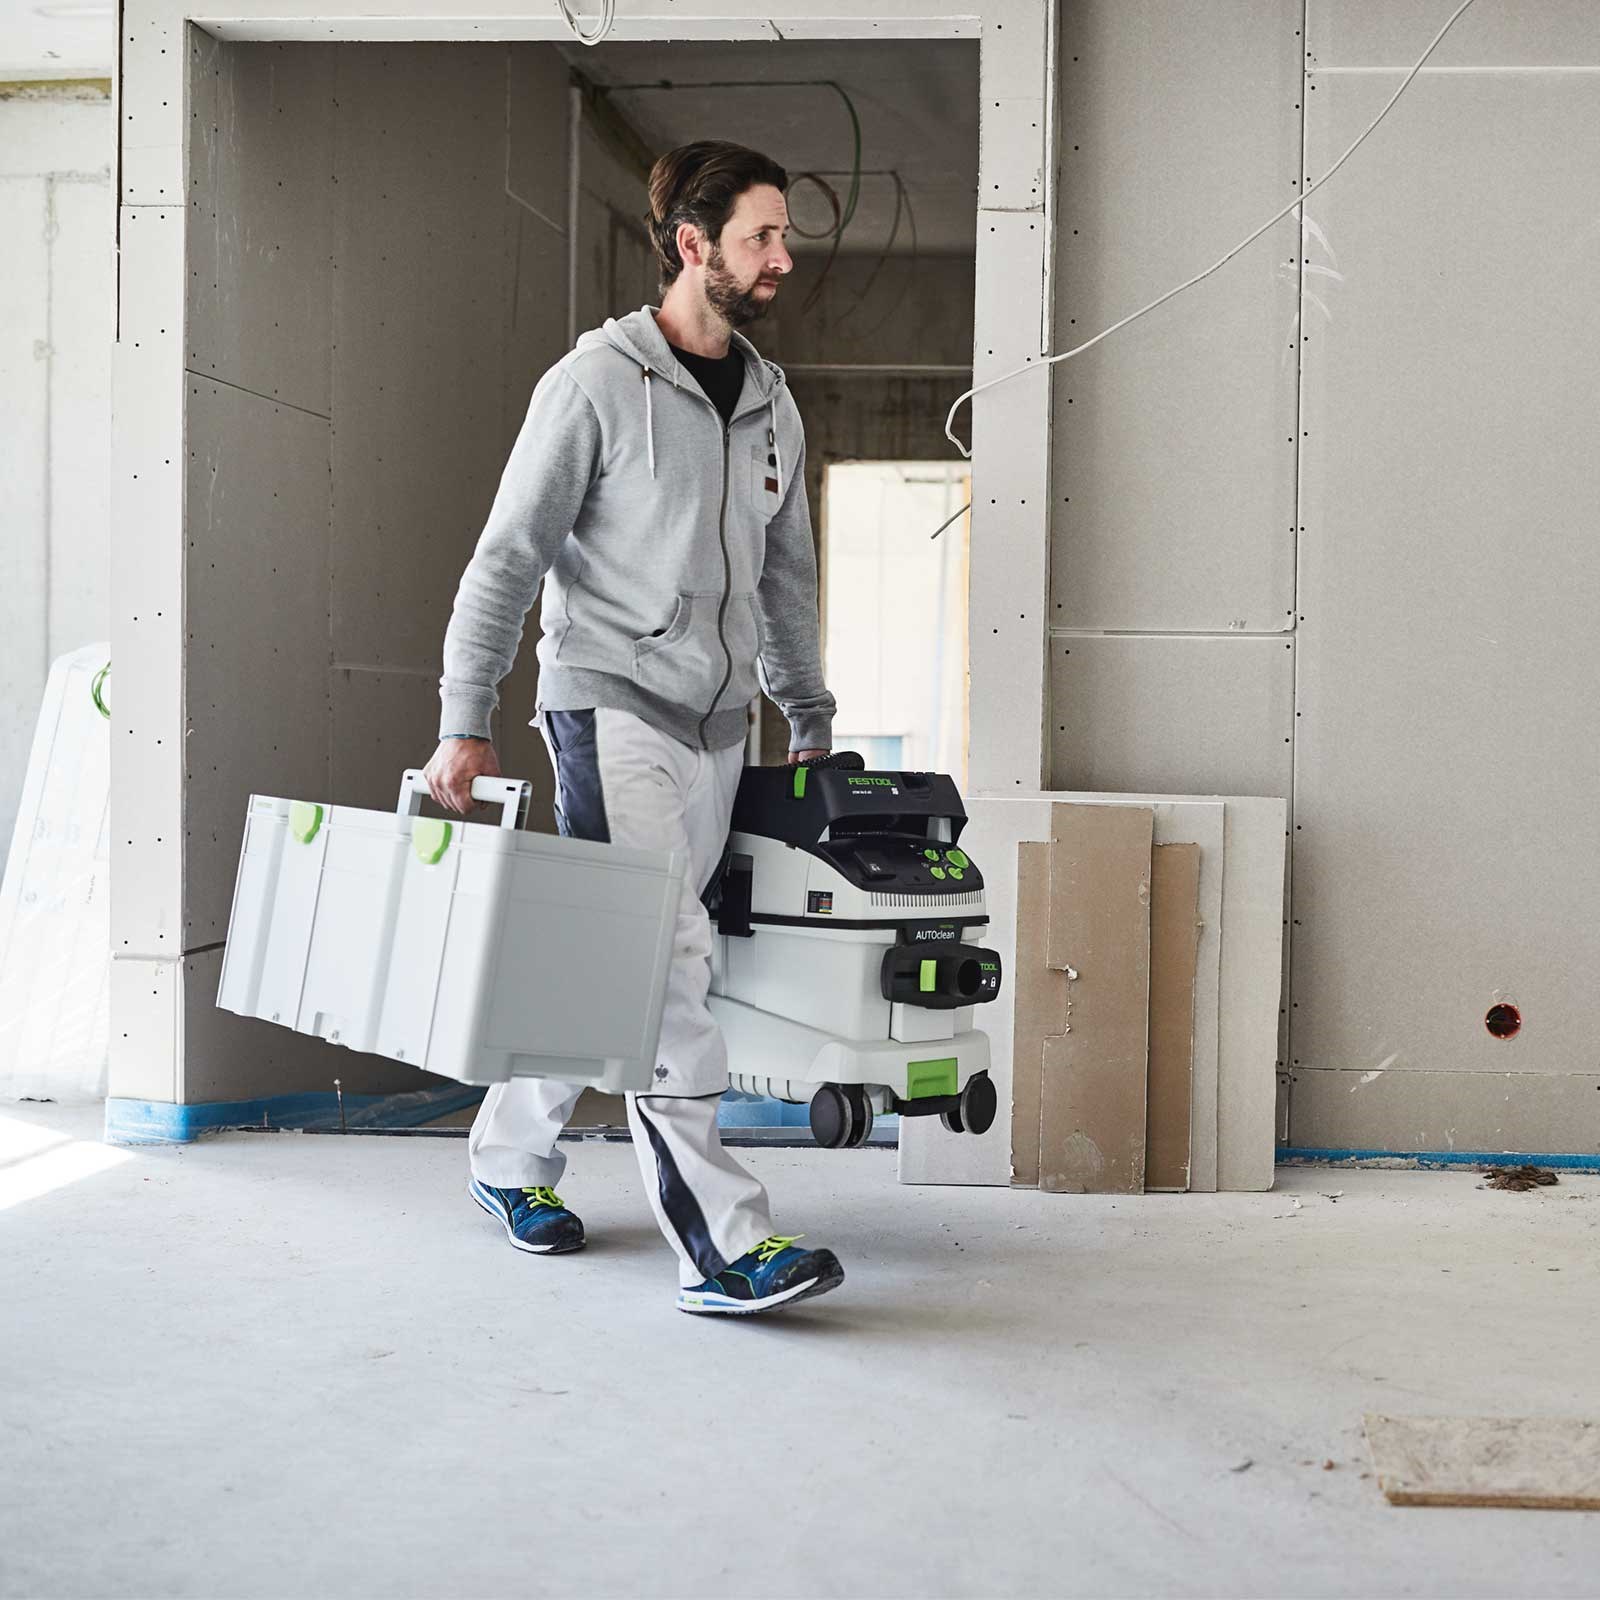 https://www.tooled-up.com/artwork/produsage/FES-204850-A1-Festool-SYS3-XXL-Extra-Large-Systainer-3-Tool-Case.jpg?w=1600&h=1600